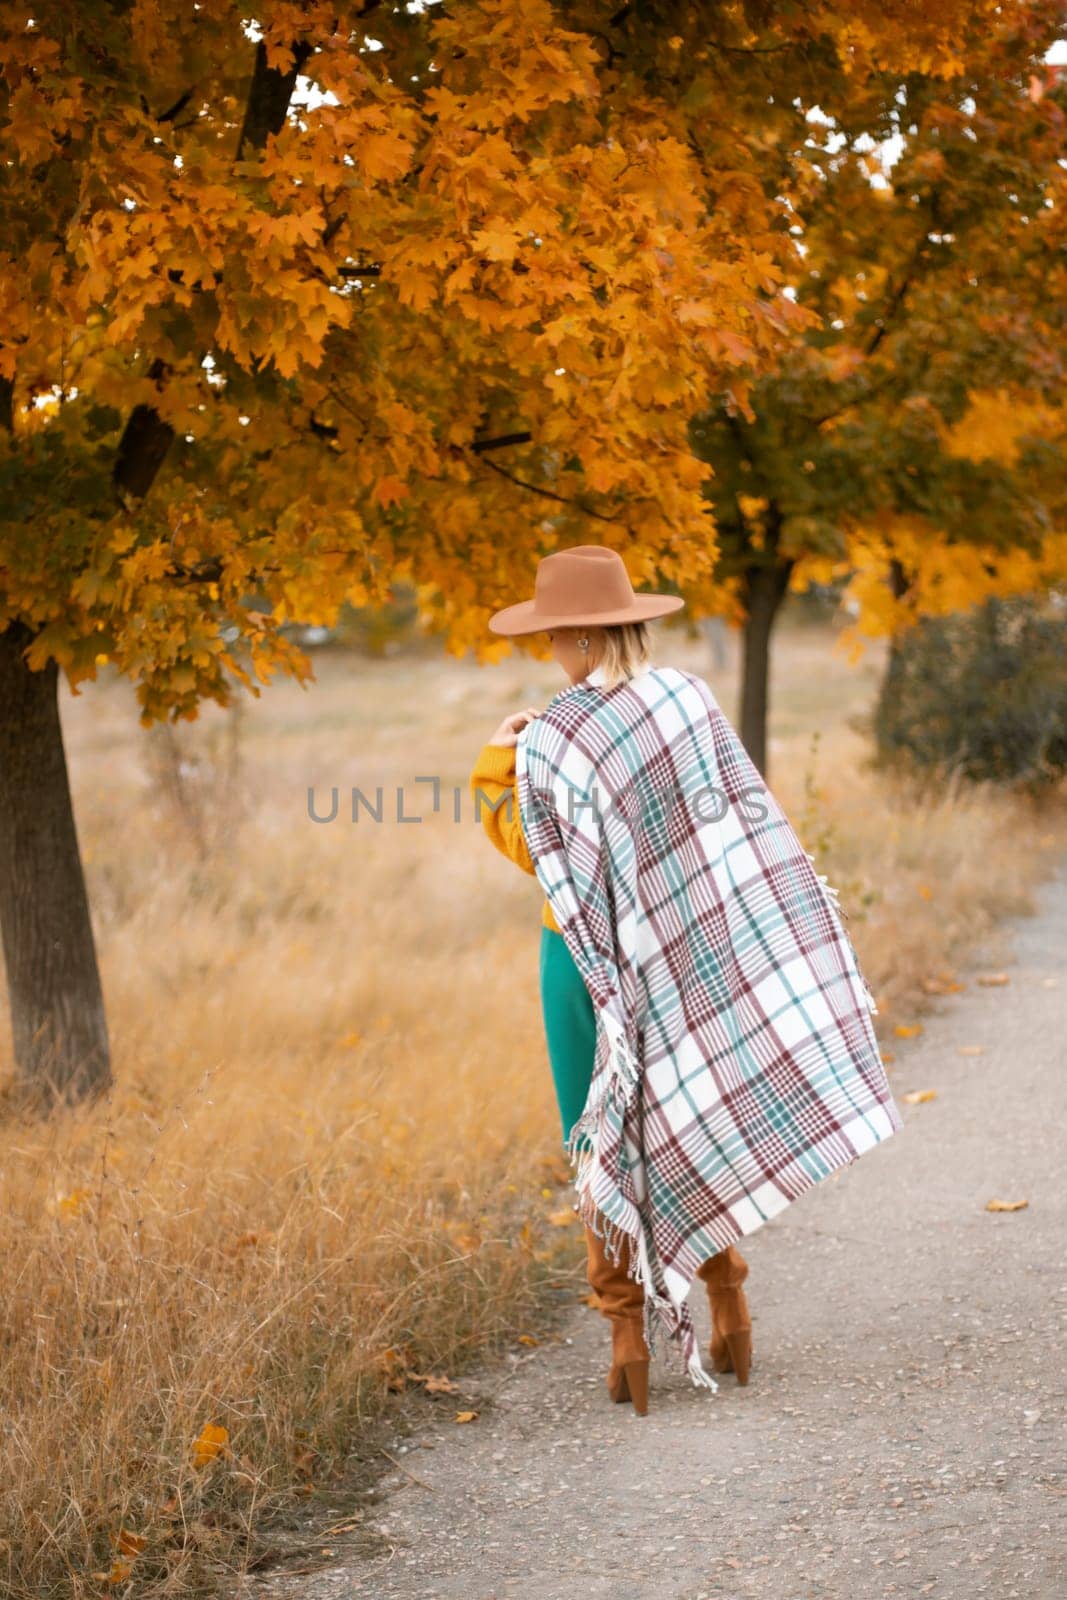 autumn woman in a green dress, brown hat, plaid, against the background of an autumn tree.